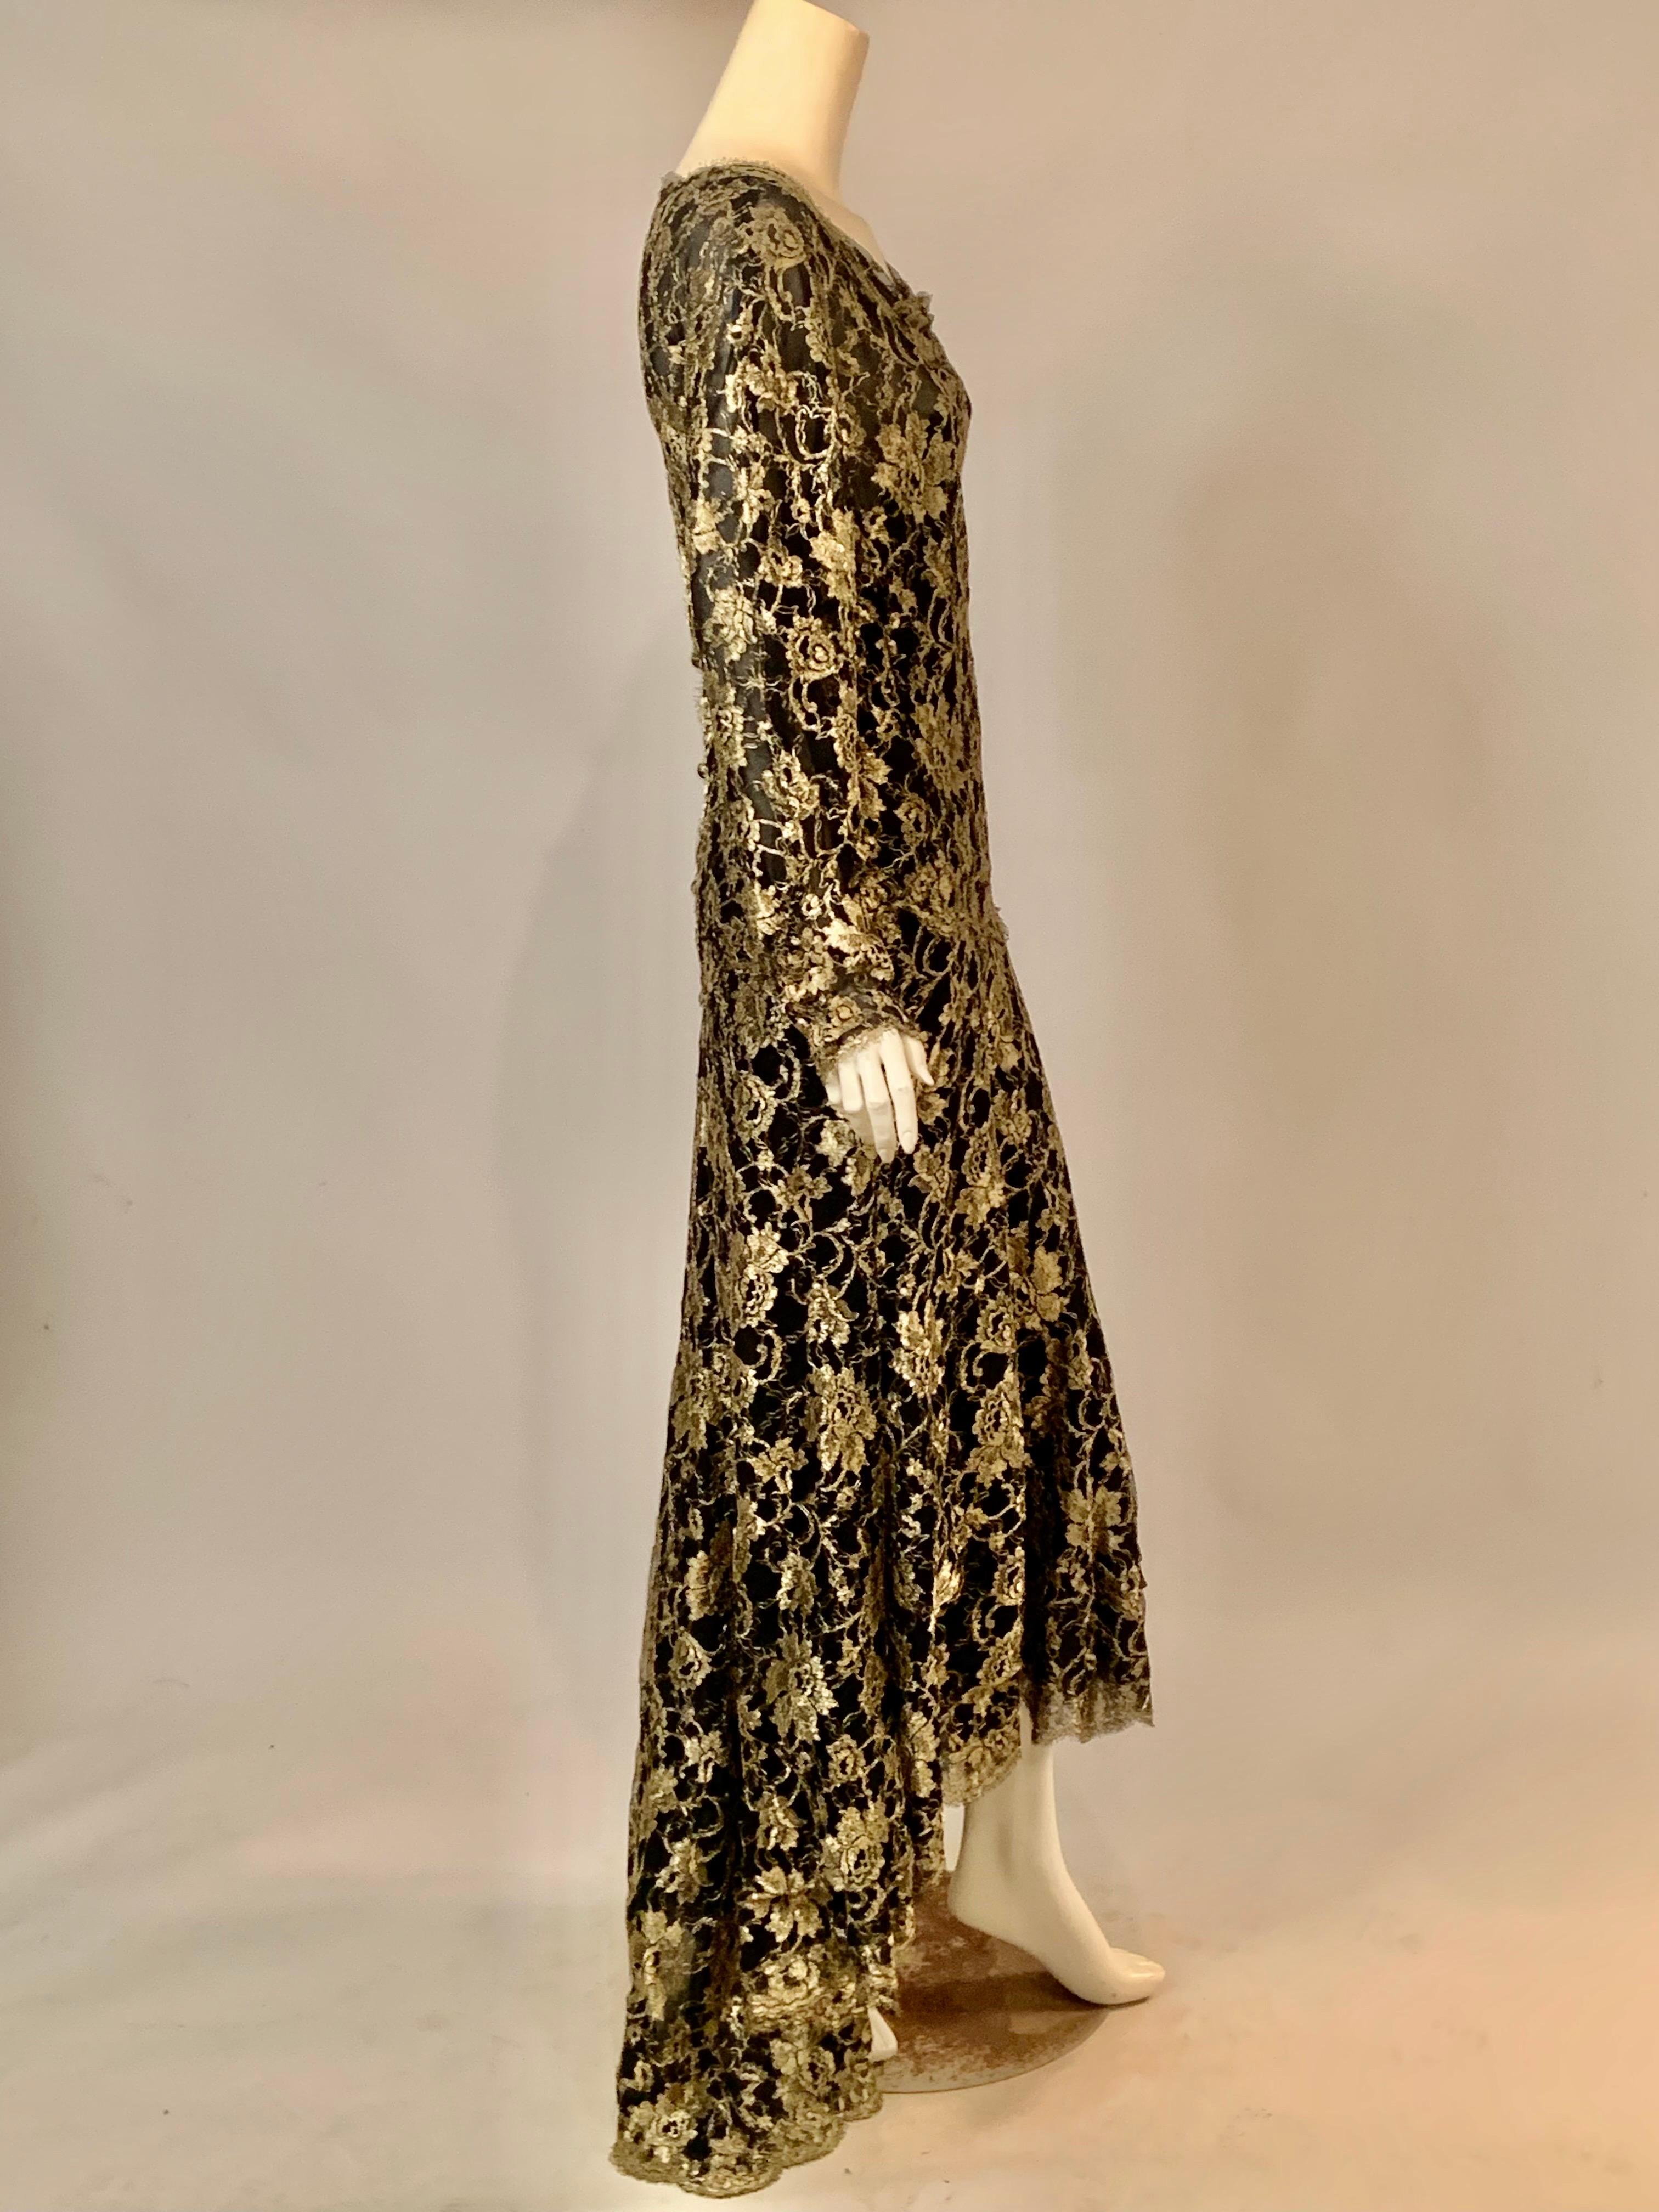 1986 Chanel by Karl Lagerfeld Gold and Black Lace Gown with Train Original Tag For Sale 12